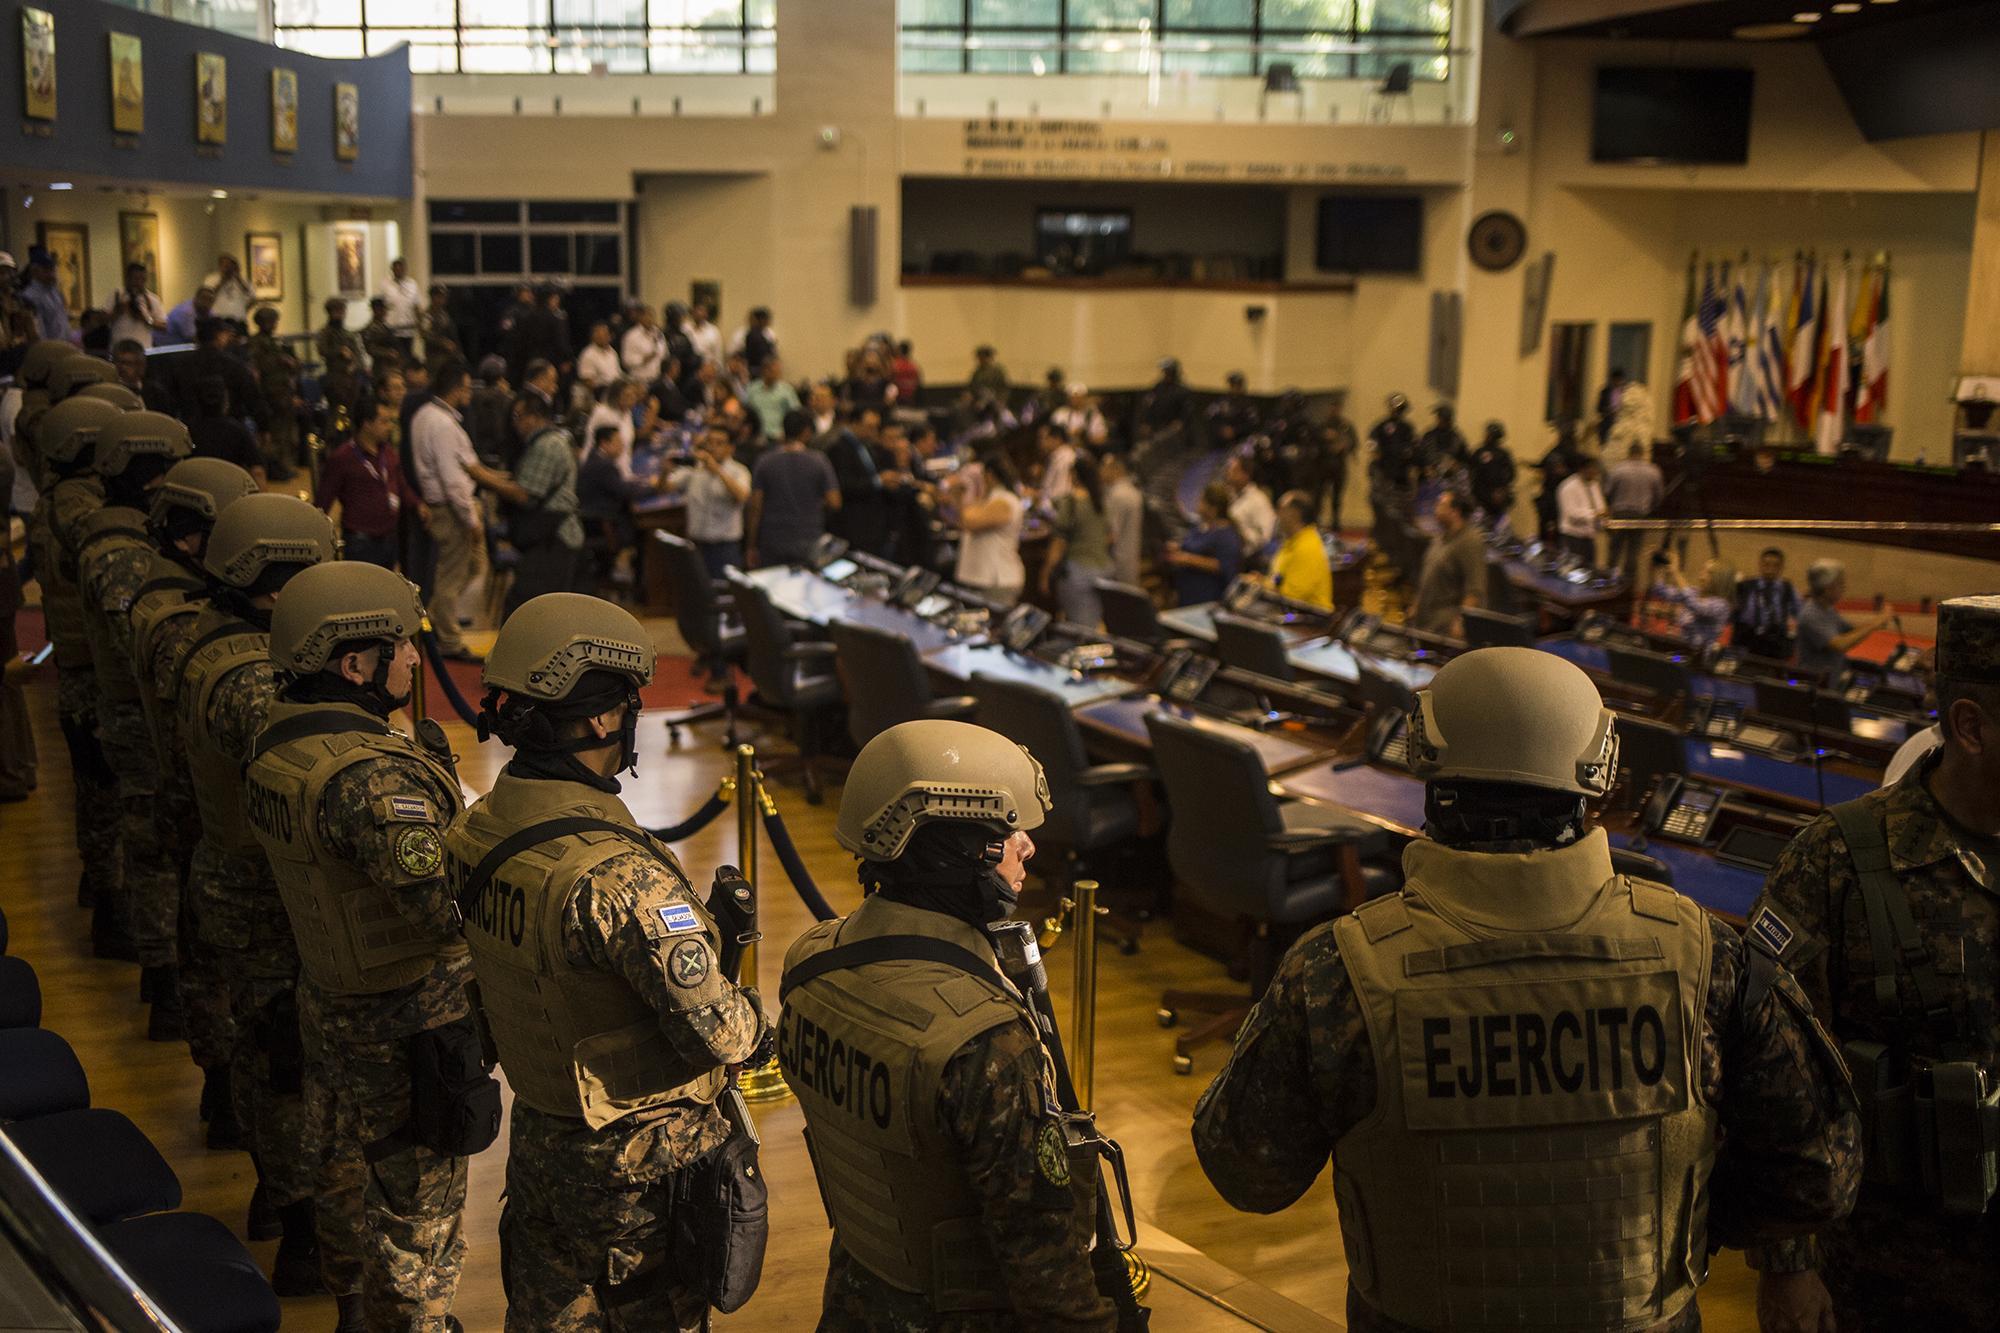 For the first time in Salvadoran history, the military broke into the main chamber of Congress at 4:25 p.m. The armed troops surrounded the hall where only 31 out of 84 legislators had gathered. Bukele showed up thirty minutes later and prayed. Photo by: Víctor Peña. 